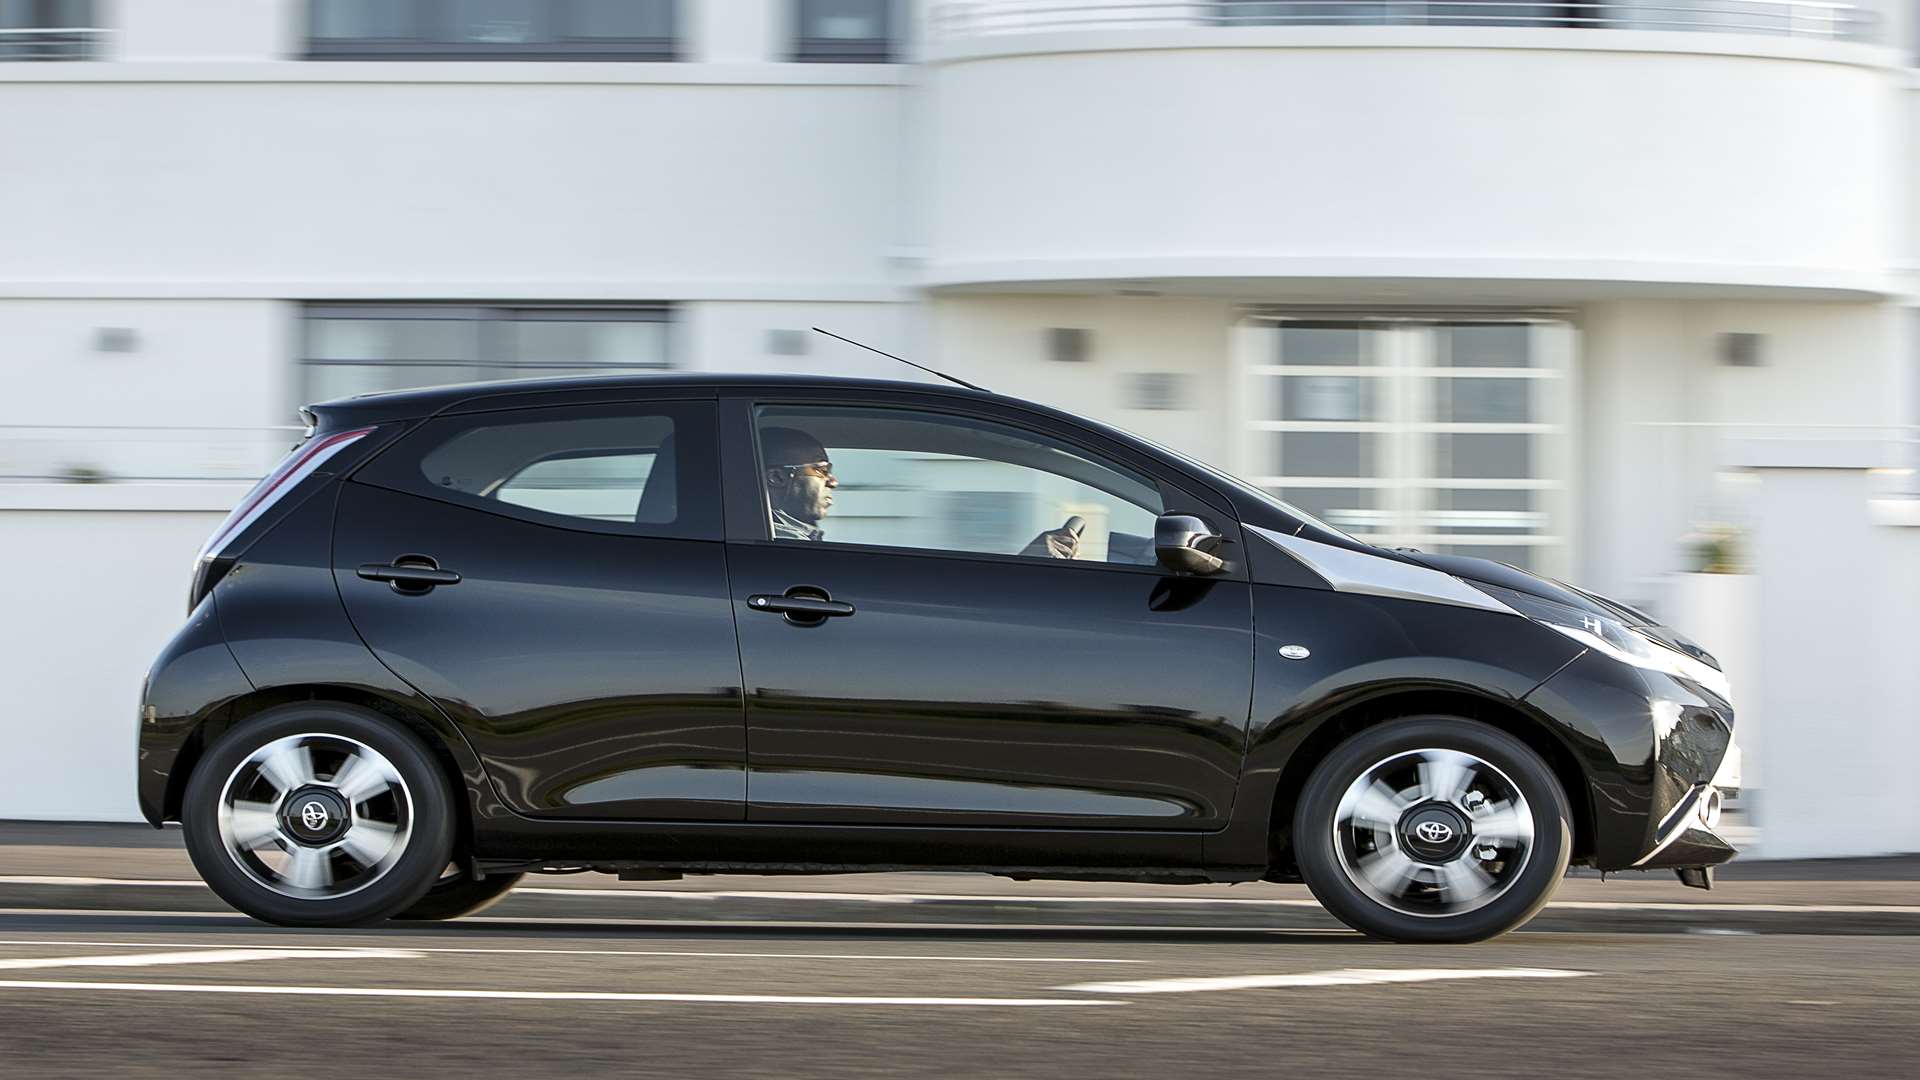 The Aygo's design is inspired by Japanese youth culture, apparently